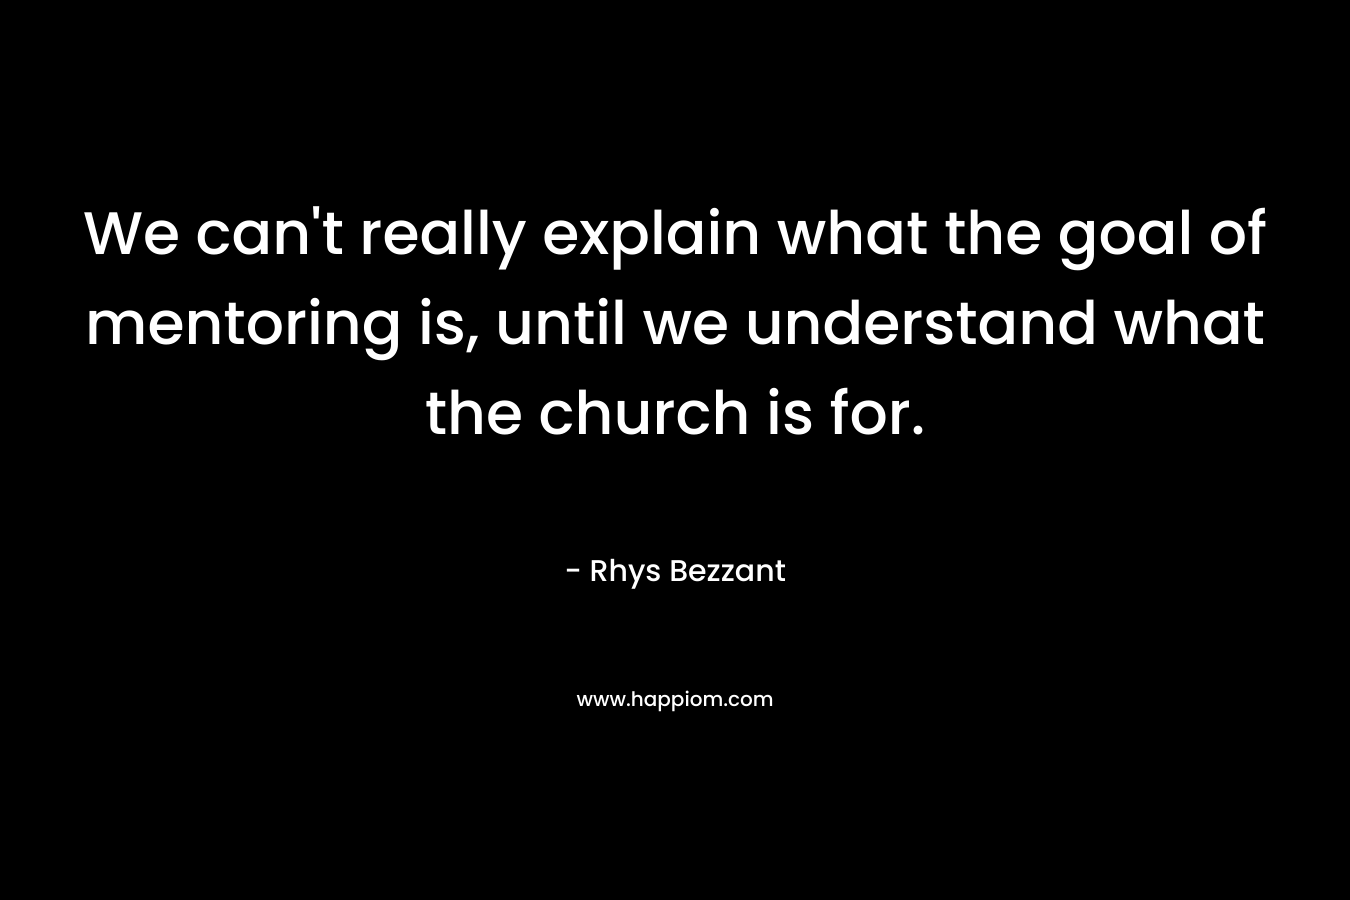 We can’t really explain what the goal of mentoring is, until we understand what the church is for. – Rhys Bezzant